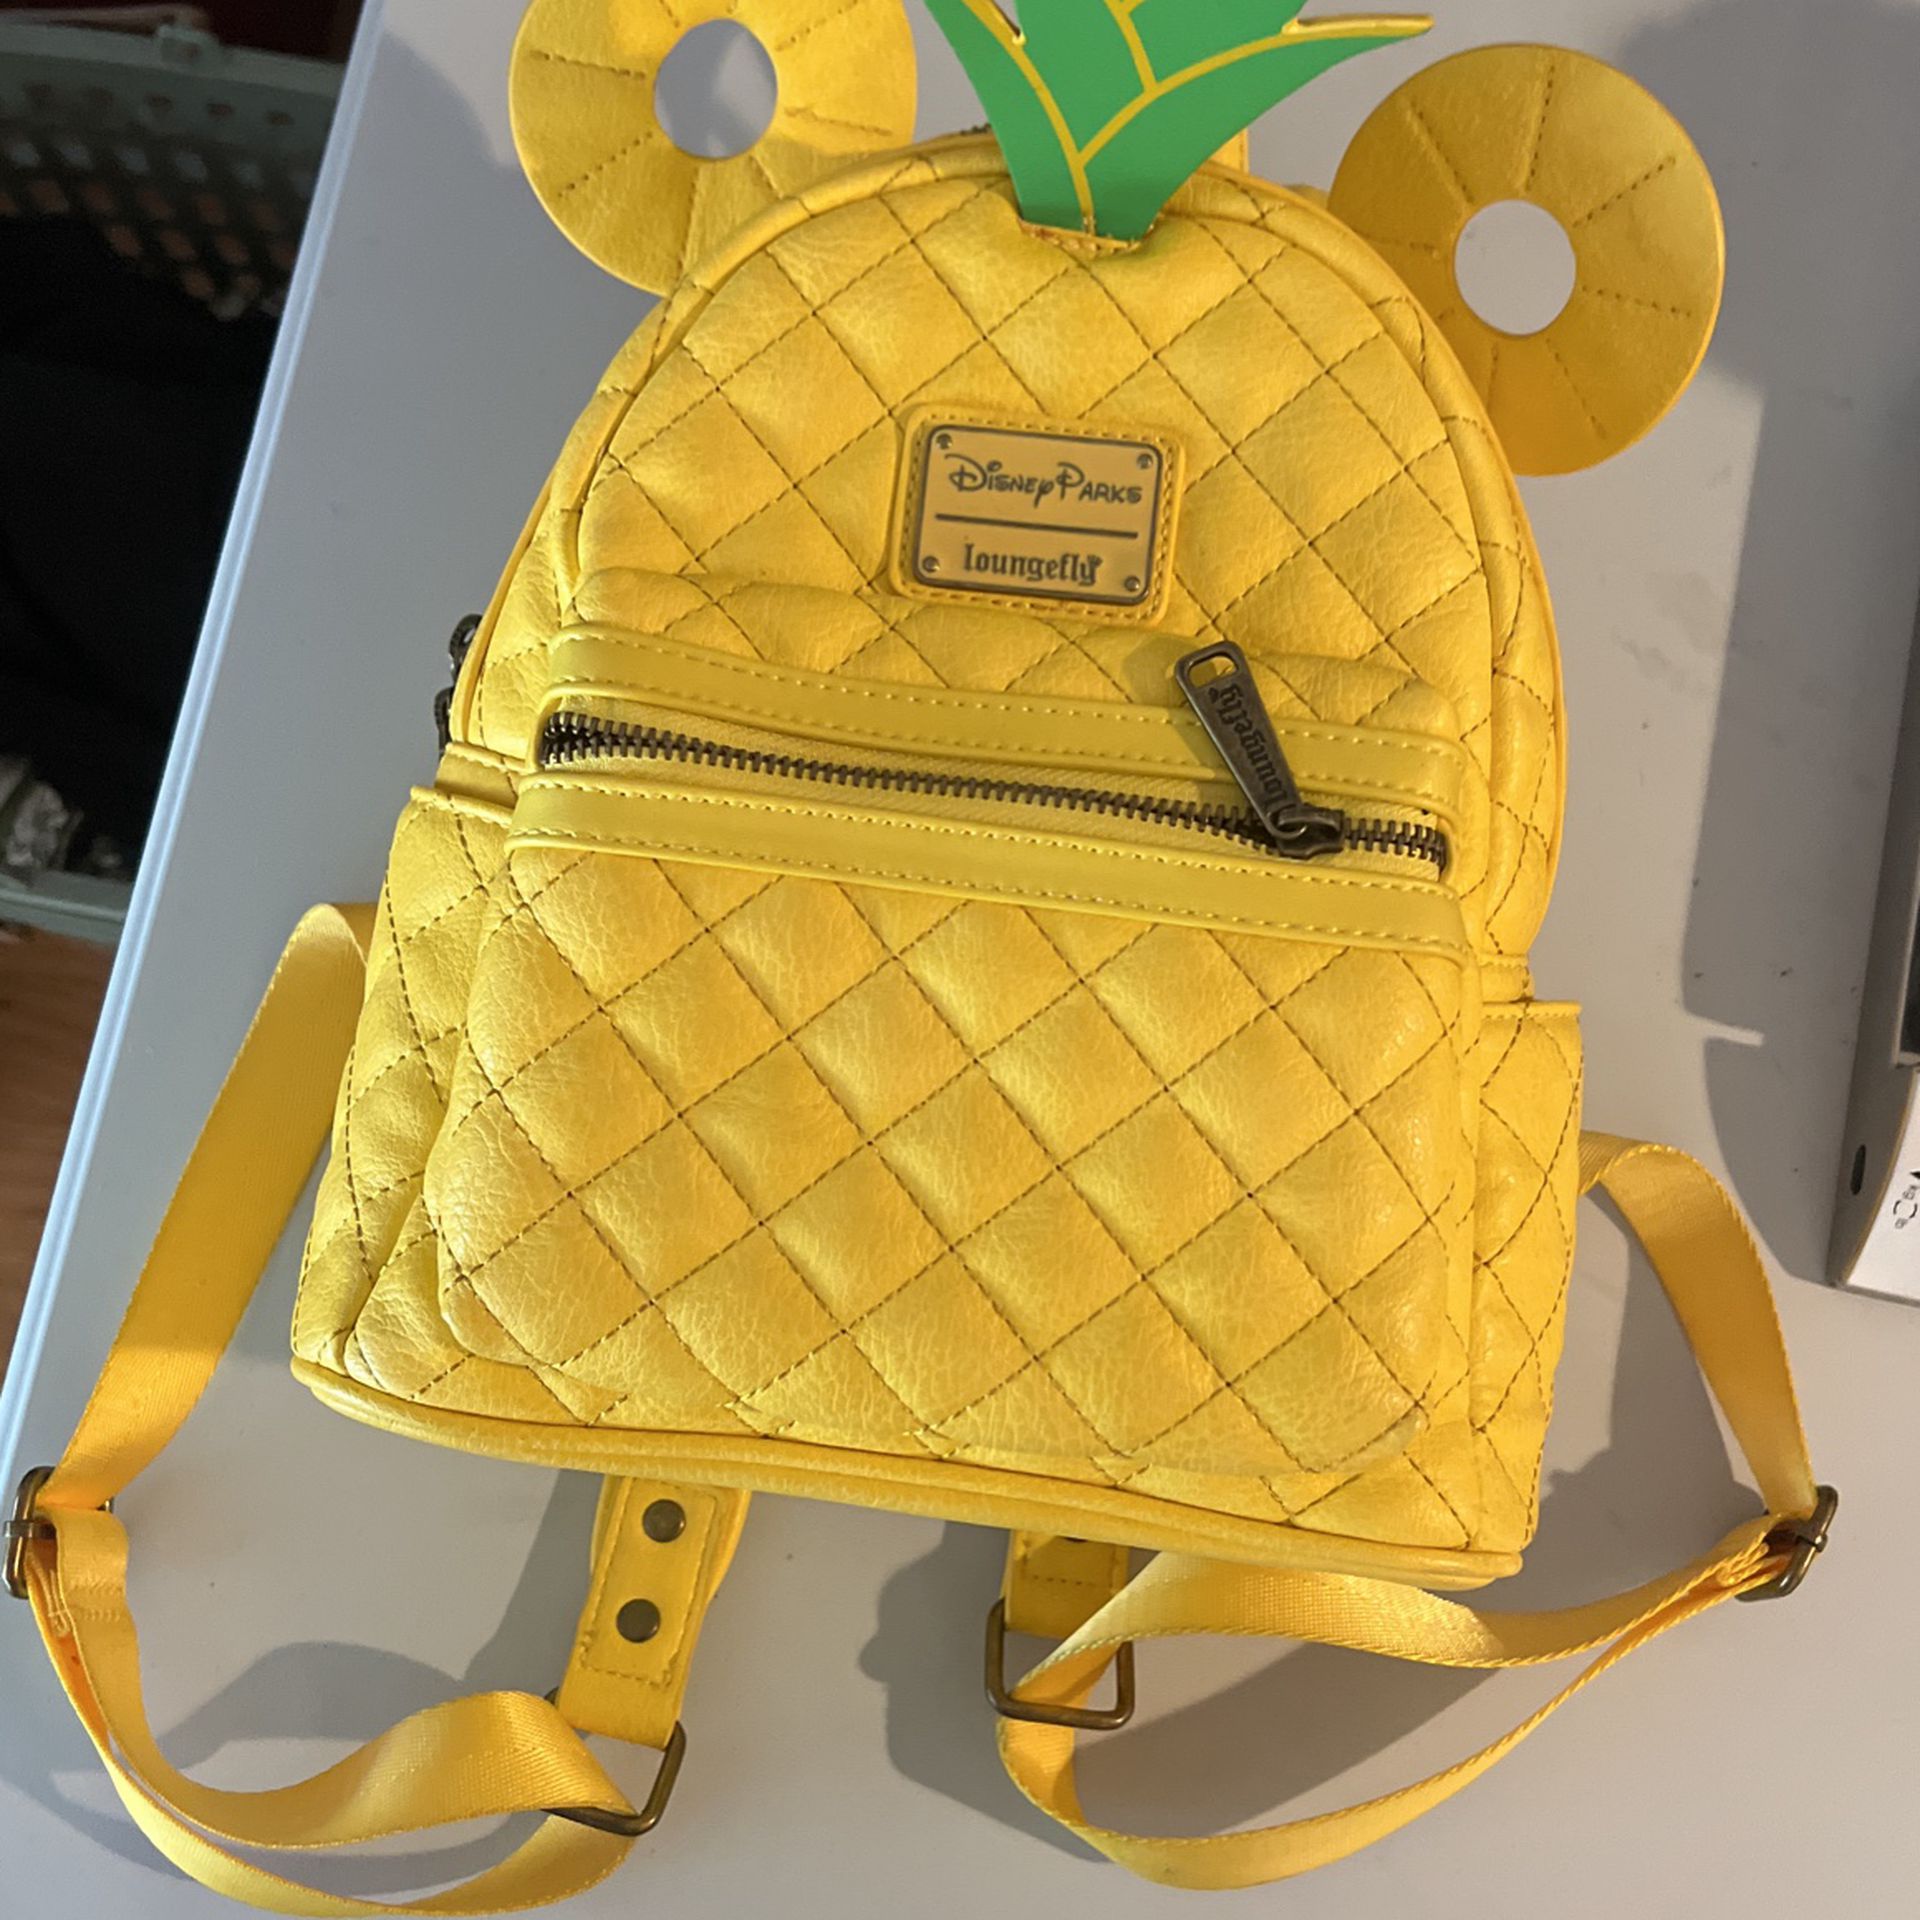 Disney Loungefly Pineapple, Mini Backpack, Mickey Mouse M